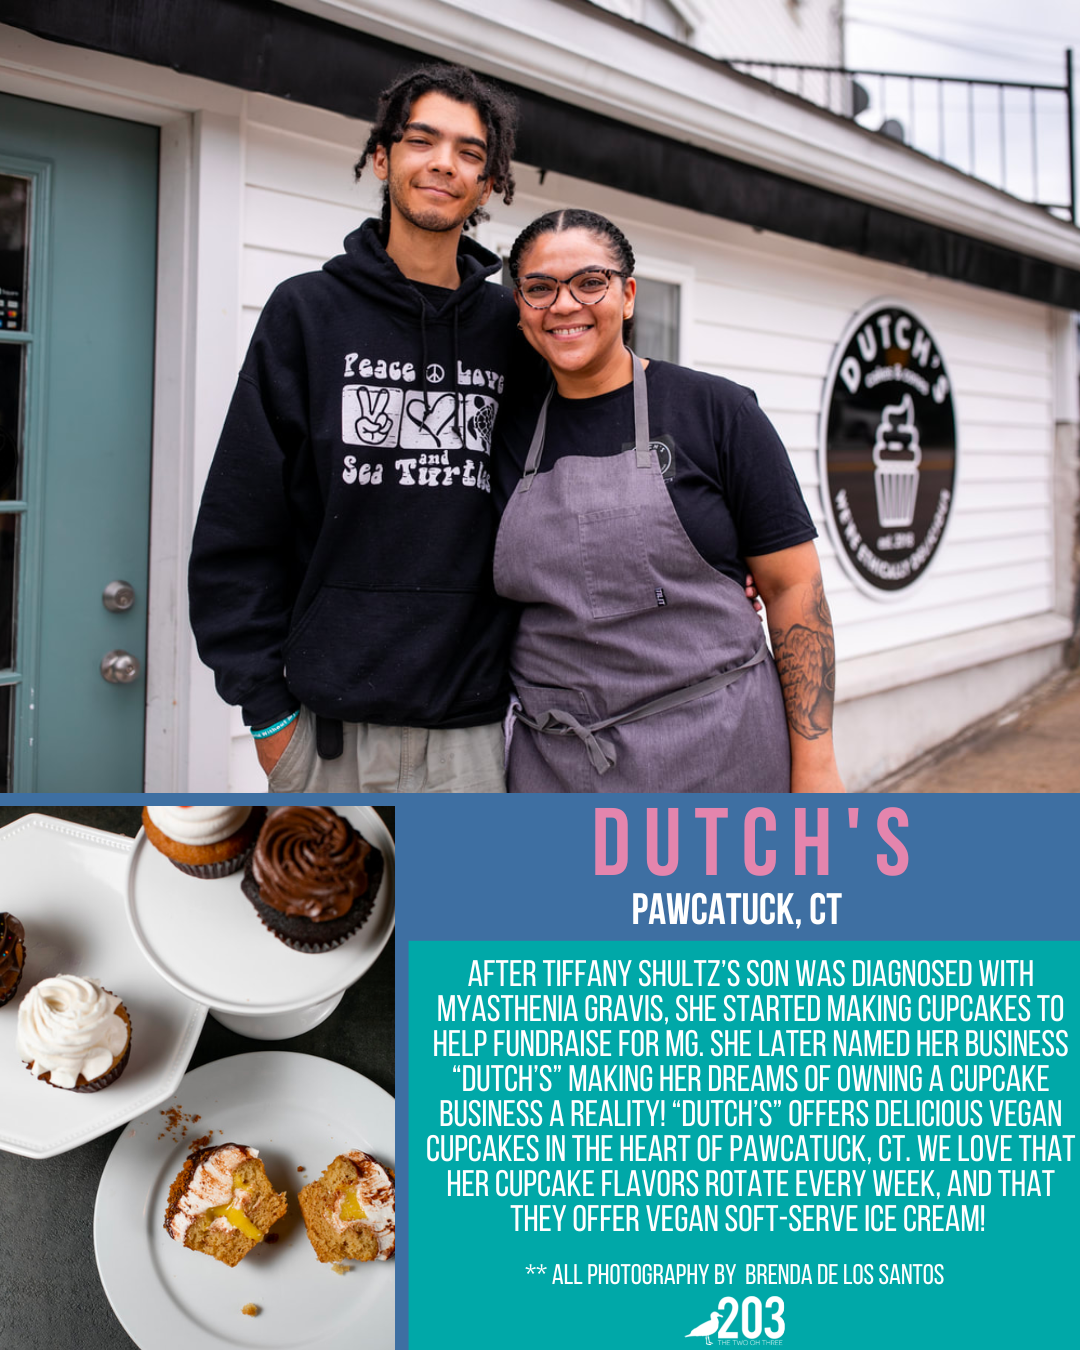 Dutchs Ice Cream Black Owned Business